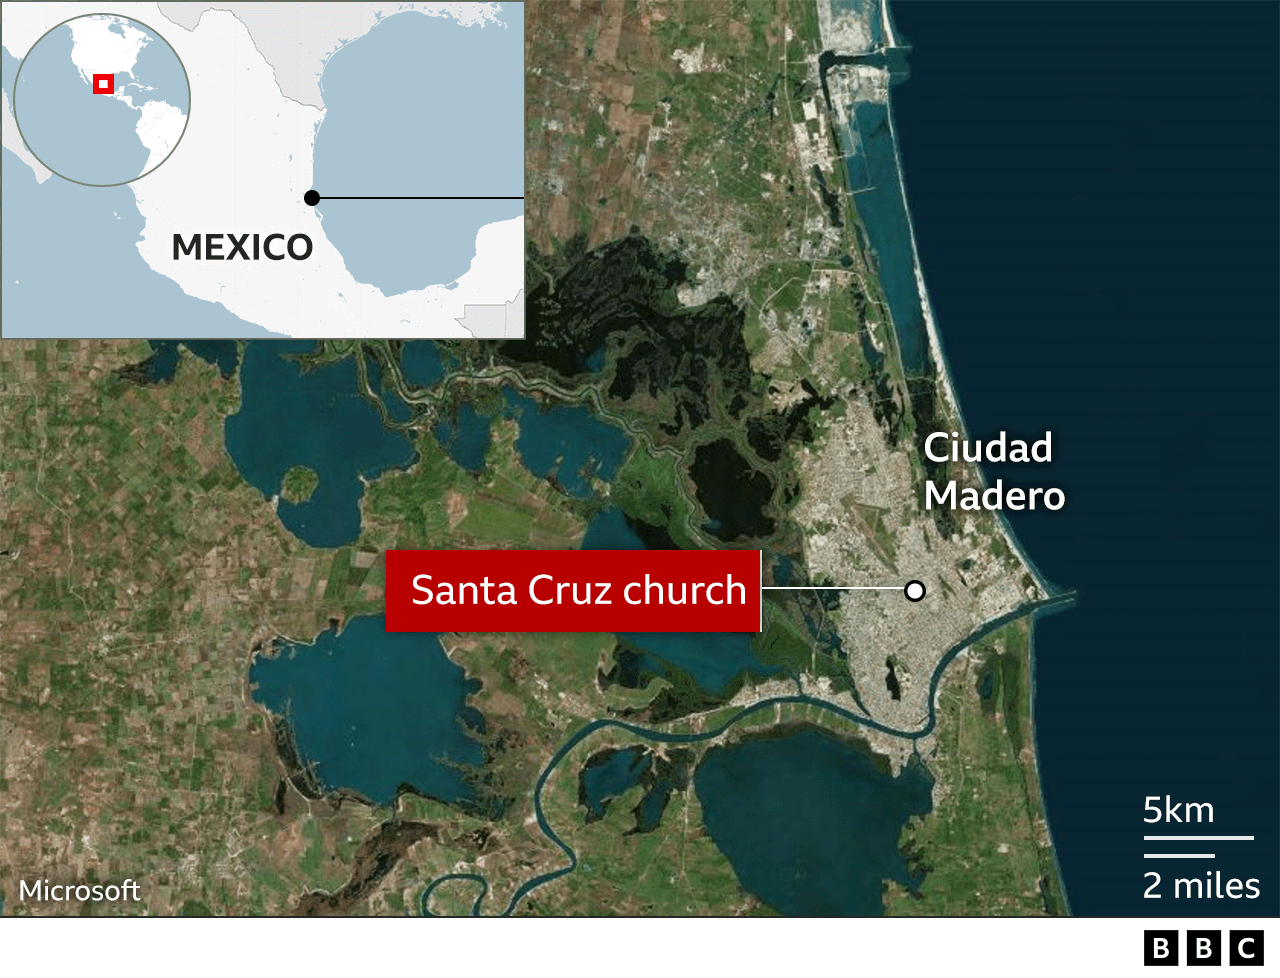 Map showing the location of the church within Ciudad Madero in Mexico.